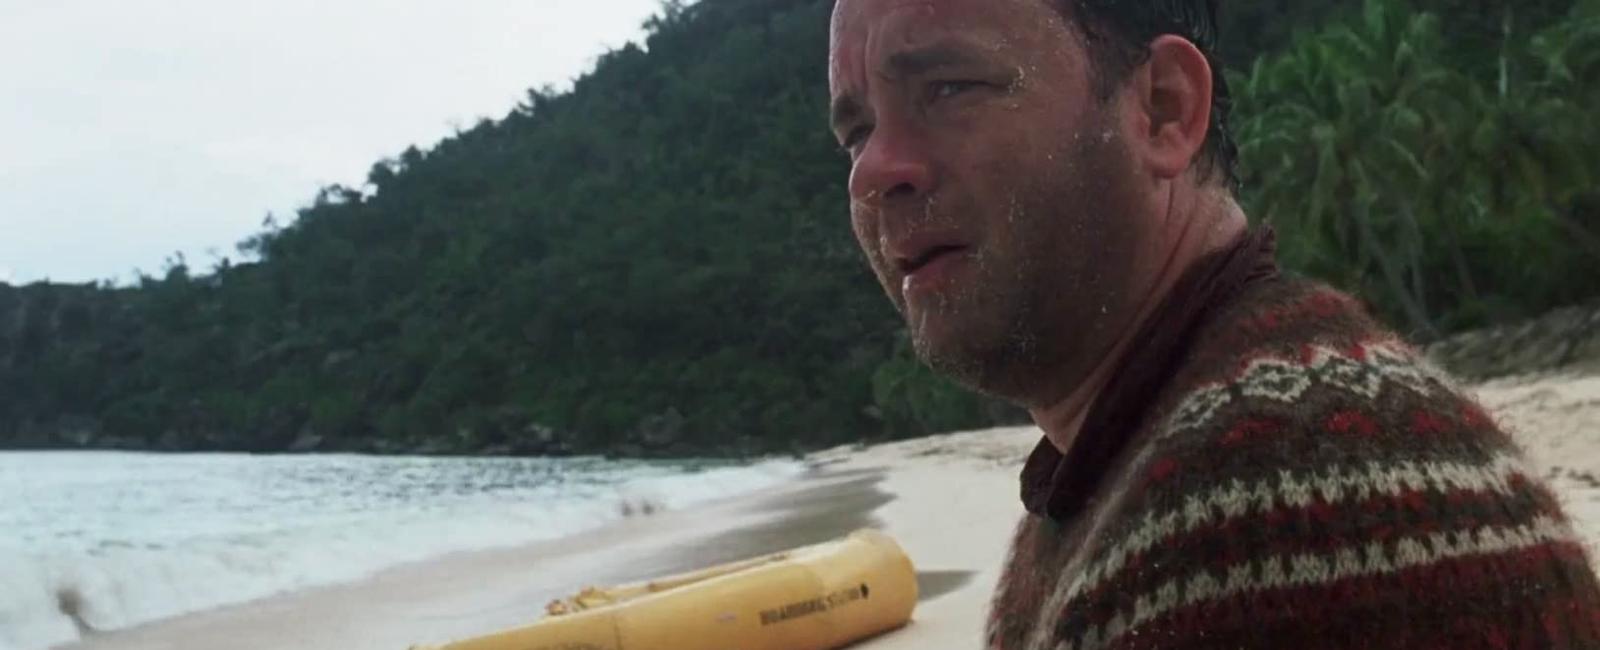 Tom hanks didn t exercise and allowed himself to grow pudgy for the role on cast away production was then halted for a year so he could lose fifty pounds and grow out his hair for his time spent on the deserted island